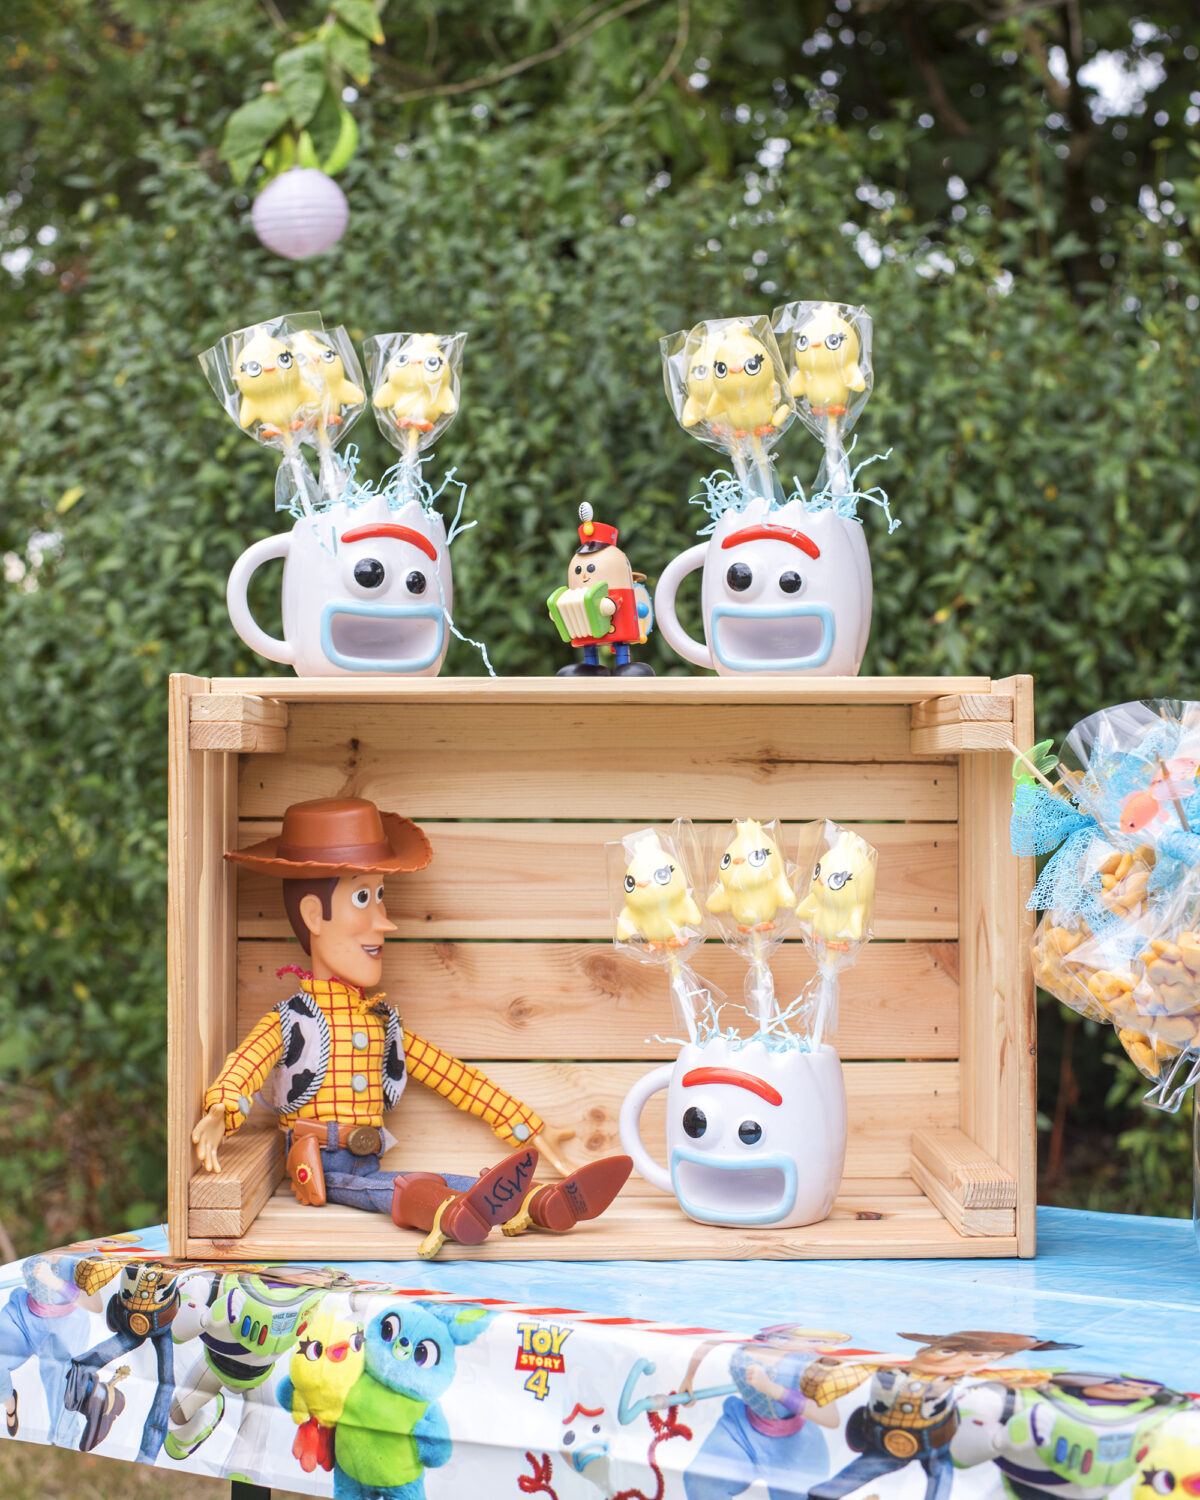 How to Throw a Disney's Toy Story Party Carnival Theme